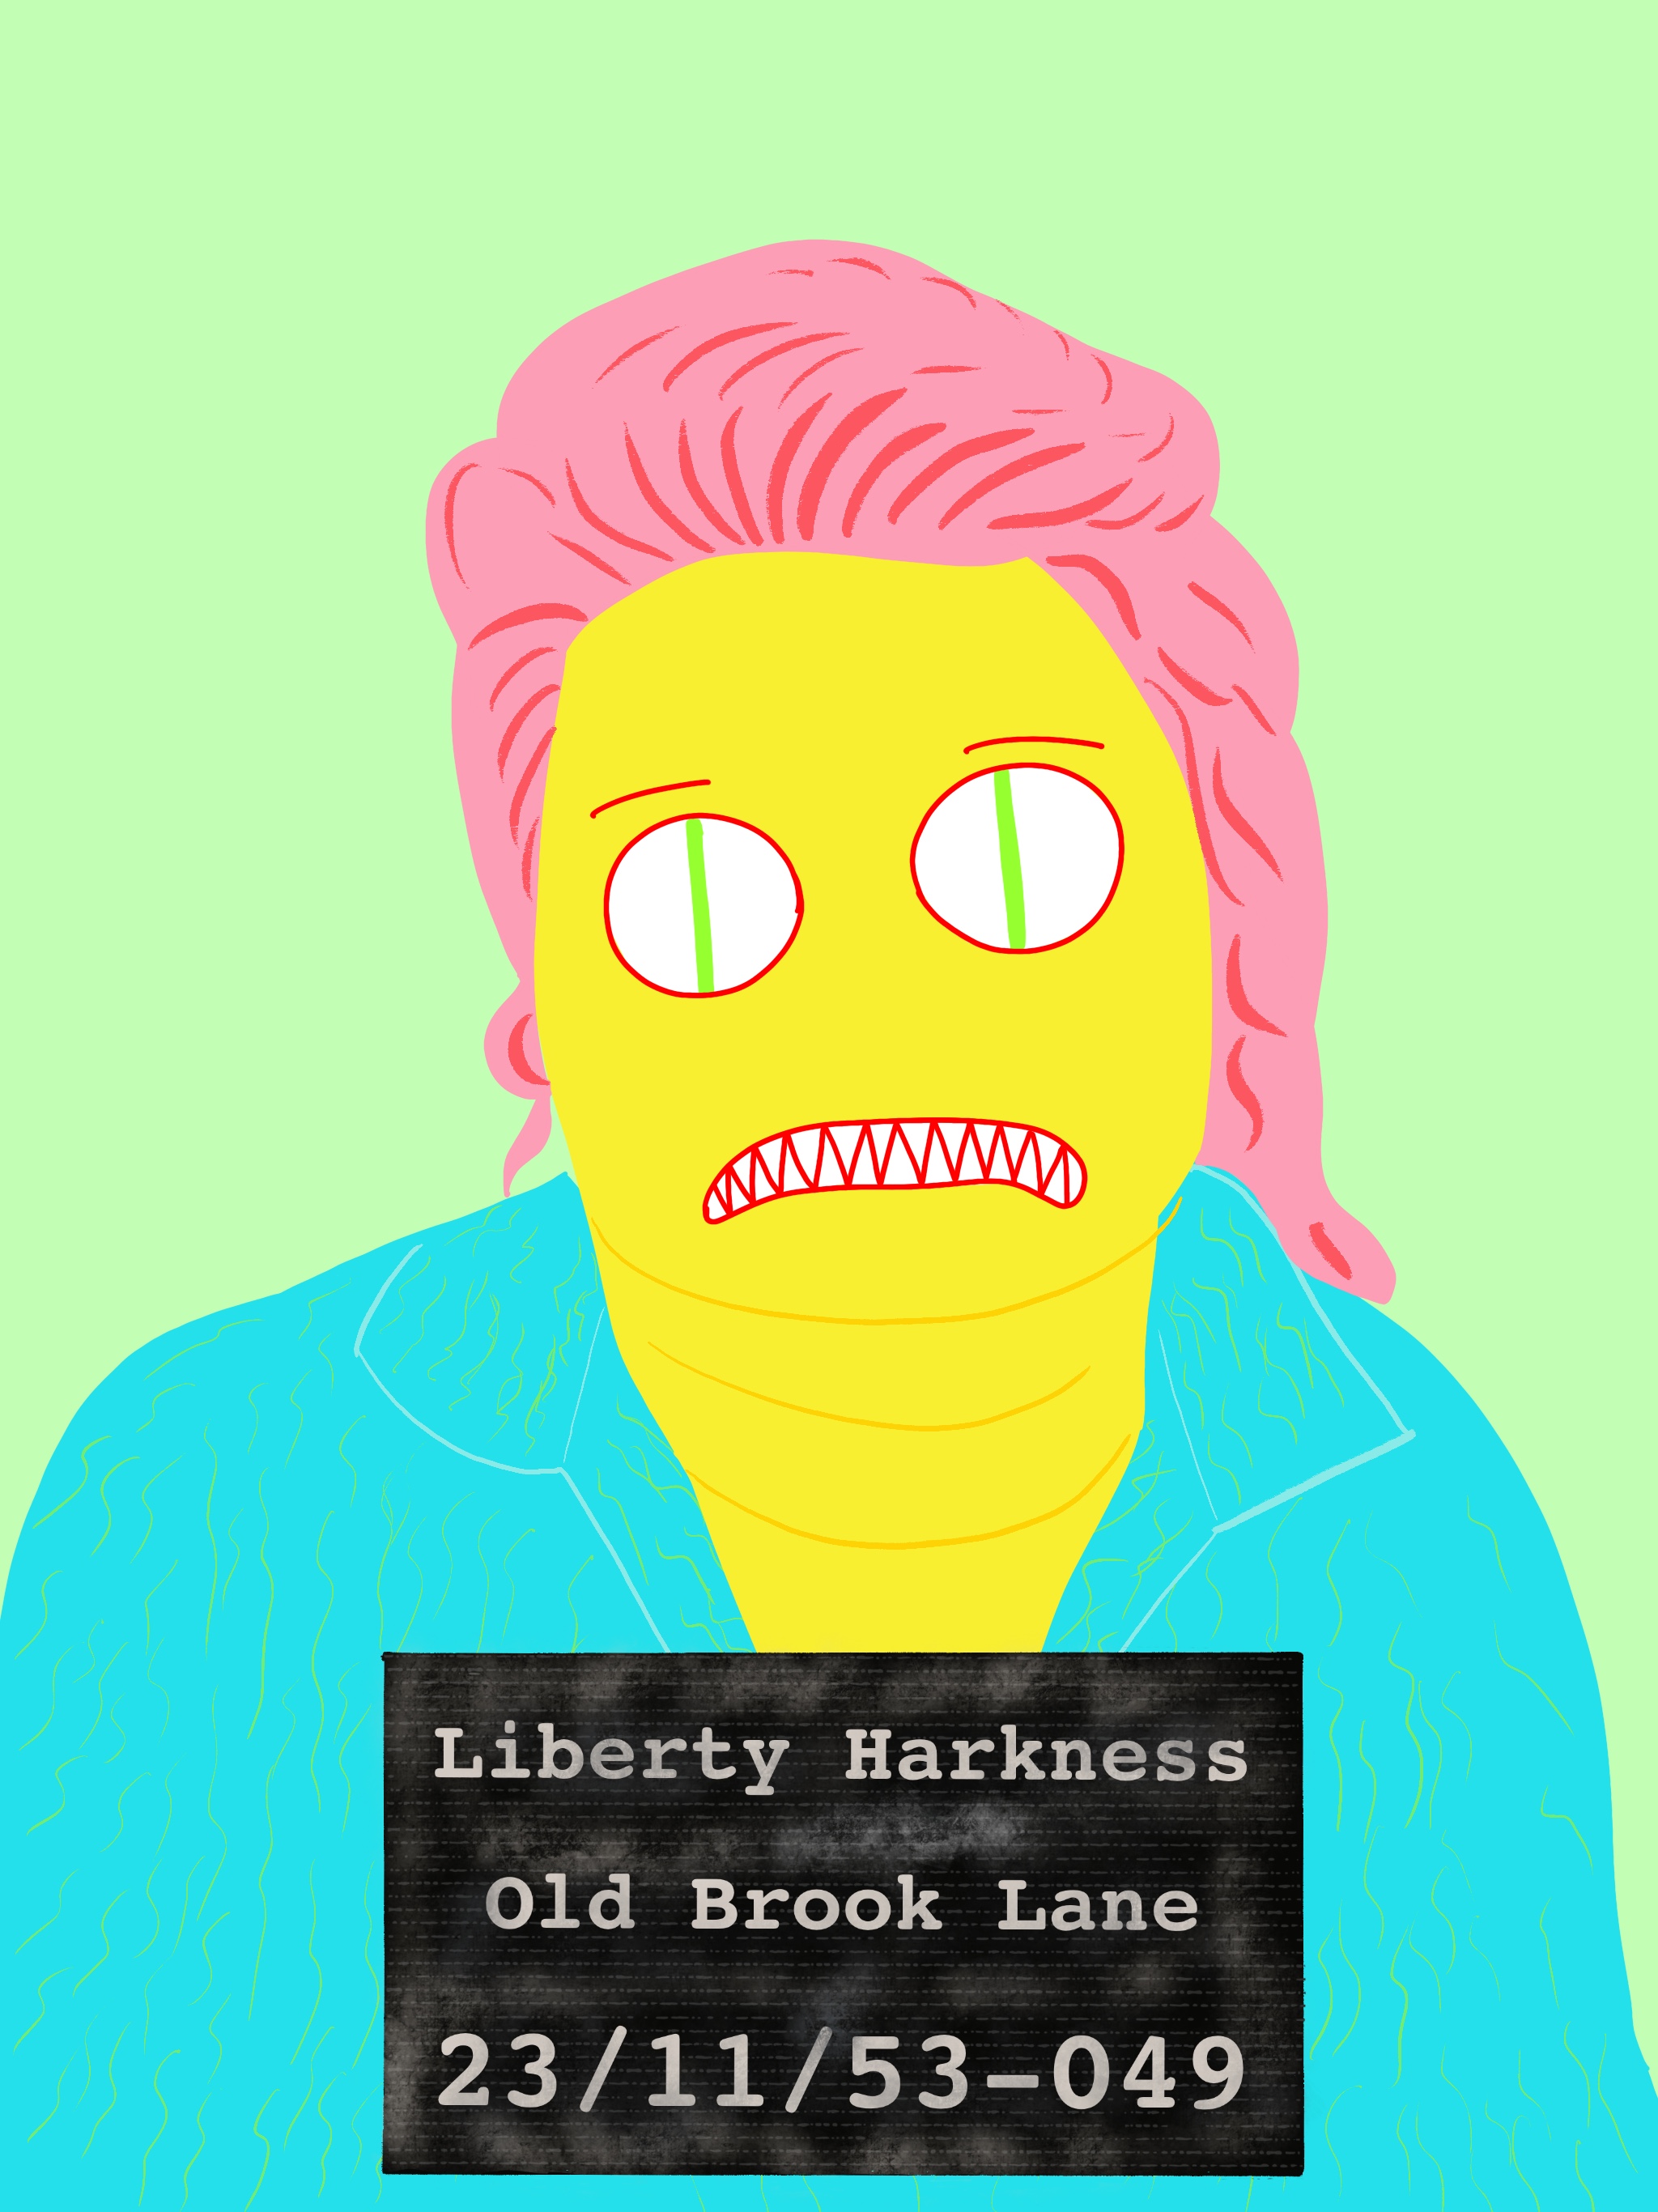 Liberty Harkness - Old Brook Lane - 231153 - 049 - Notorious Female  Terrors | OpenSea